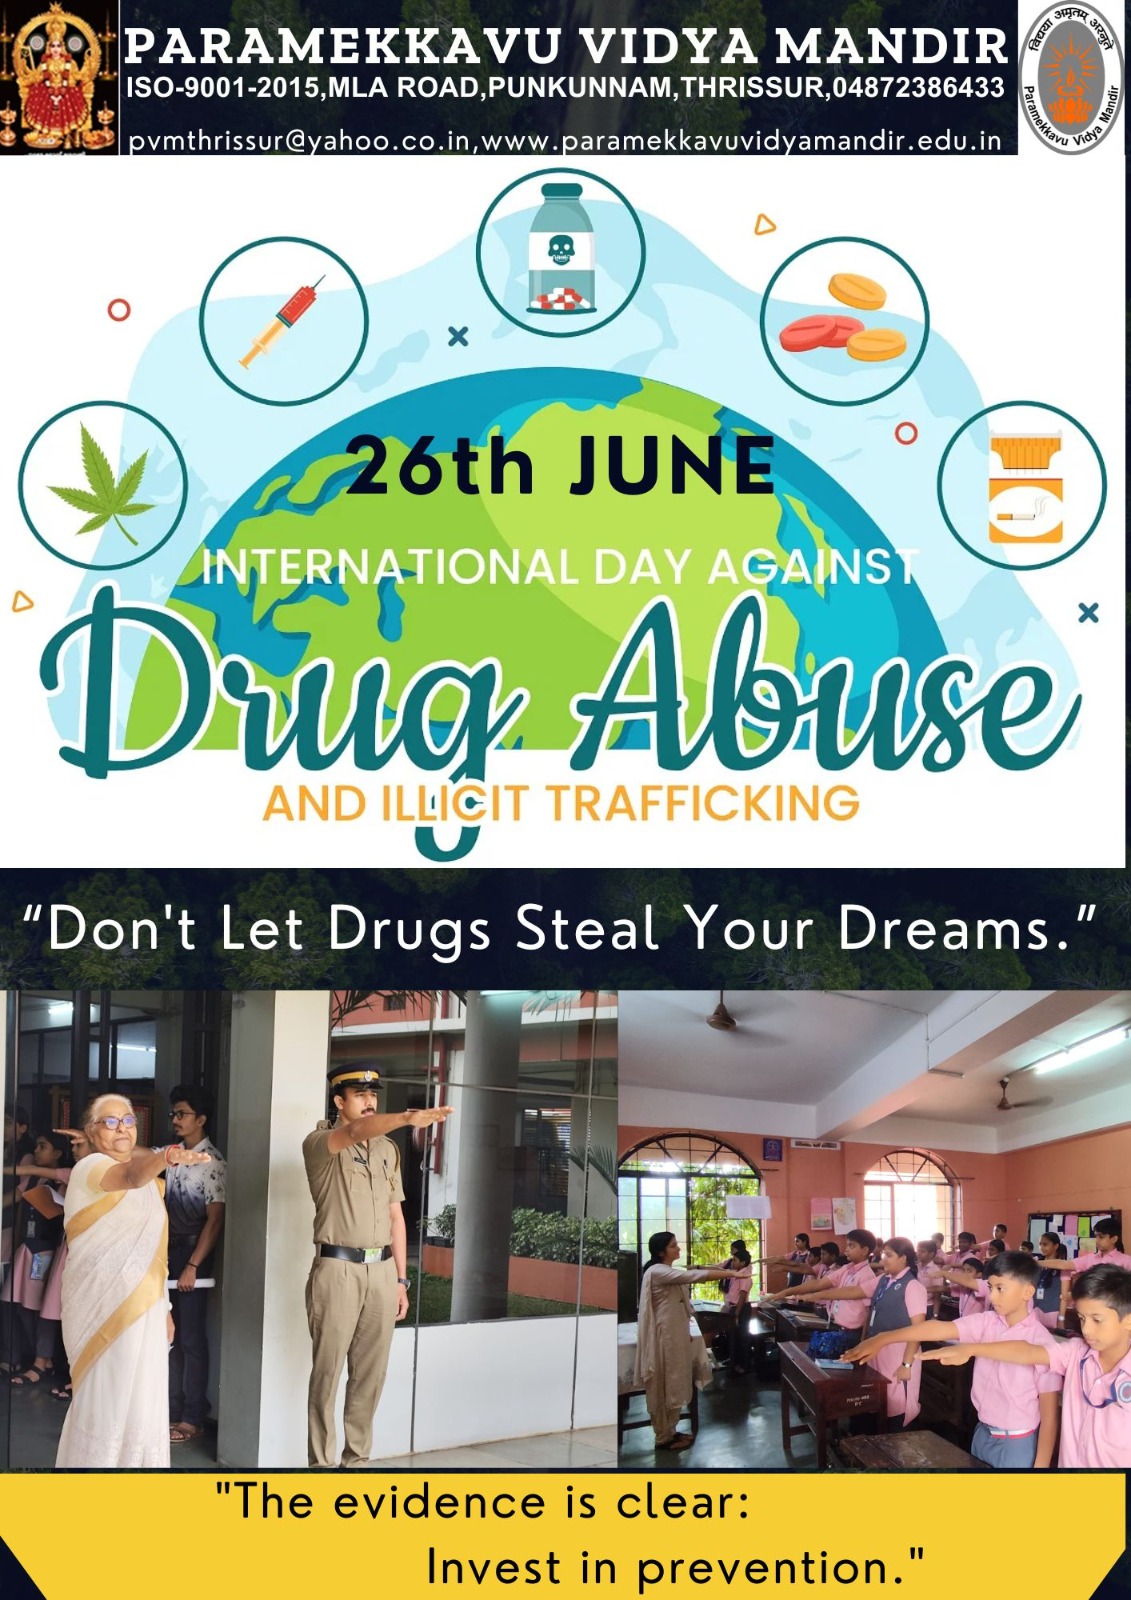 International Day Against Drug Abuse And Illicit Trafficking